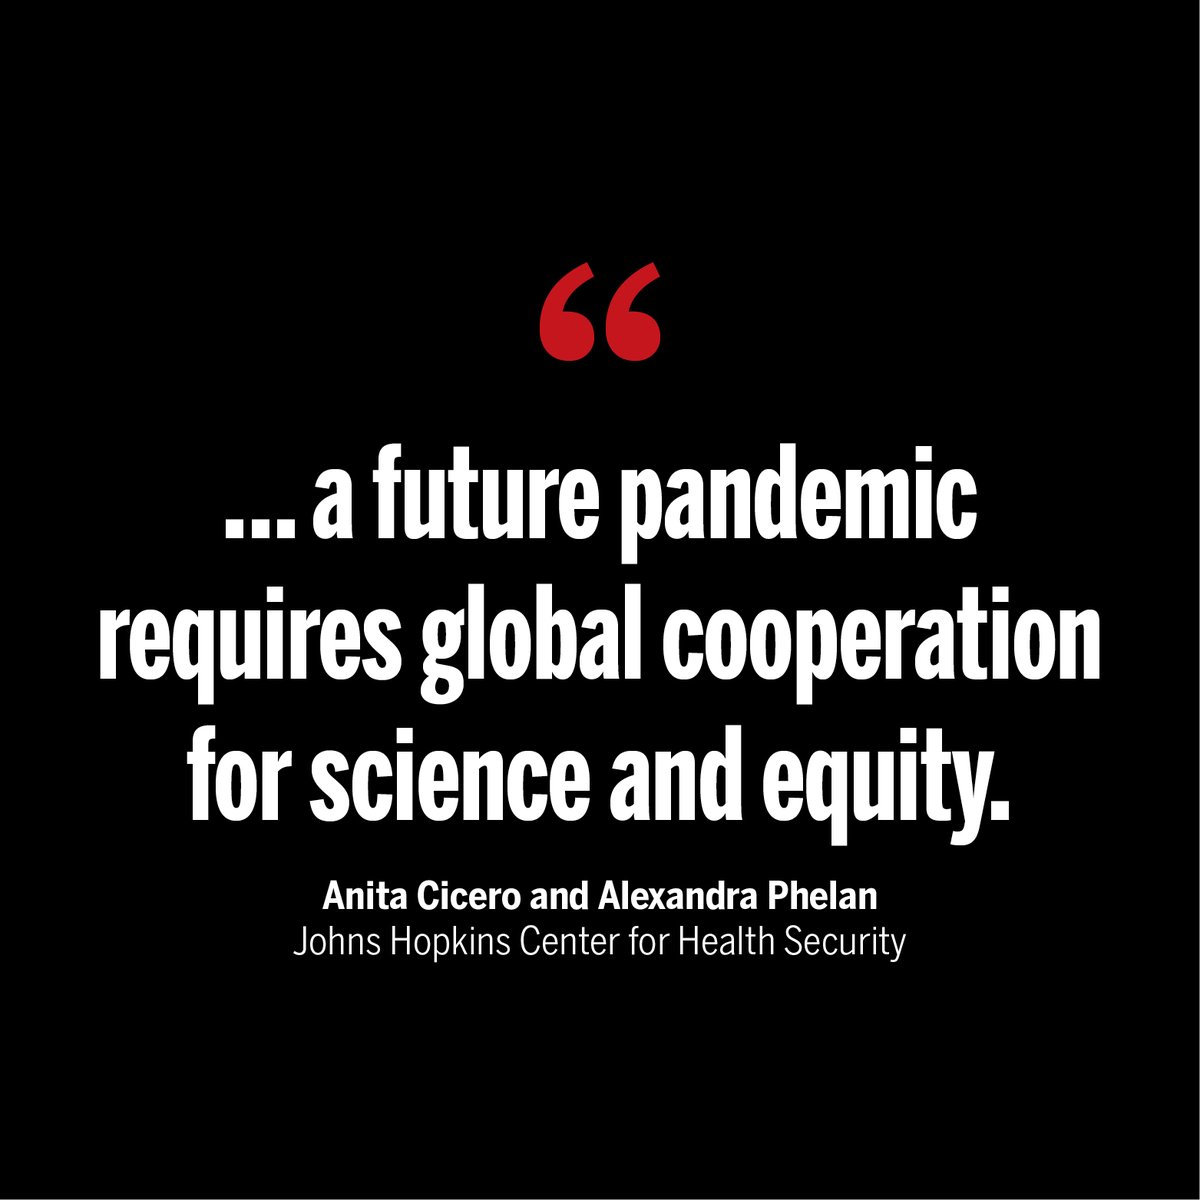 'The certainty of a future pandemic requires global cooperation for science and equity. [WHO member states] have an opportunity to lay a solid foundation that supports this ideal,' write Anita Cicero and @alexandraphelan in a new #ScienceEditorial. scim.ag/6MD